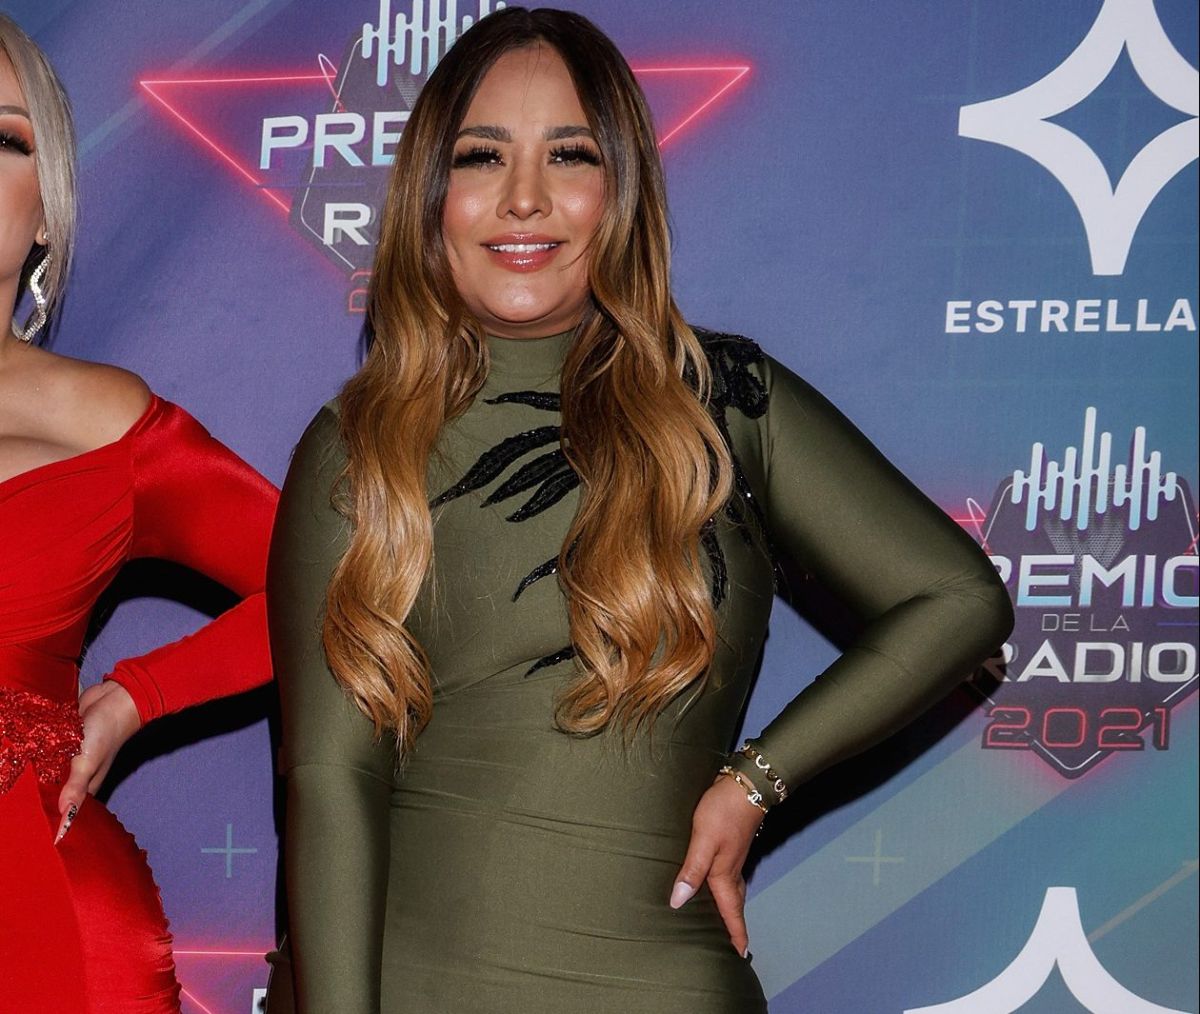 Mayeli Alonso and Kimberly Flores will give a lot to talk about in the premiere of Rica Famosa Latina